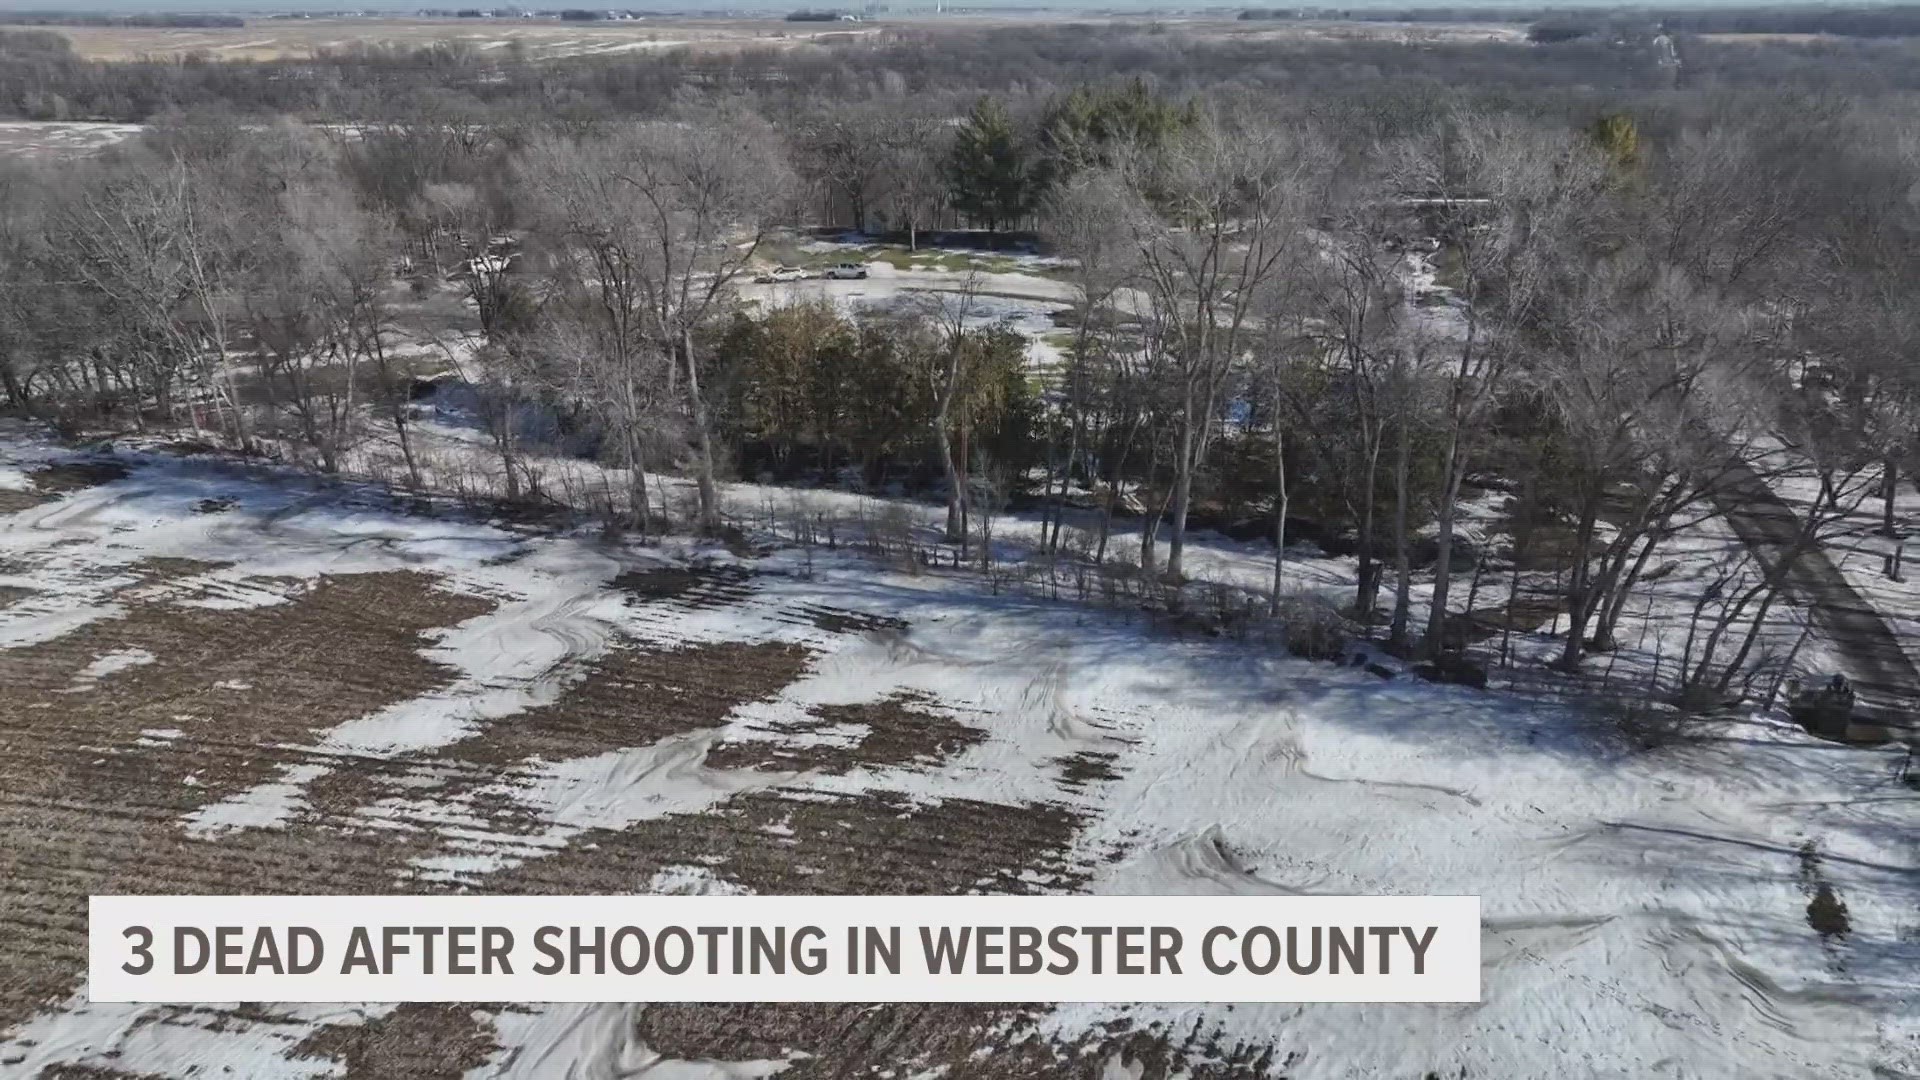 An Iowa man allegedly killed two women and then turned the gun on himself, a minor reported to Webster County authorities on Sunday evening.